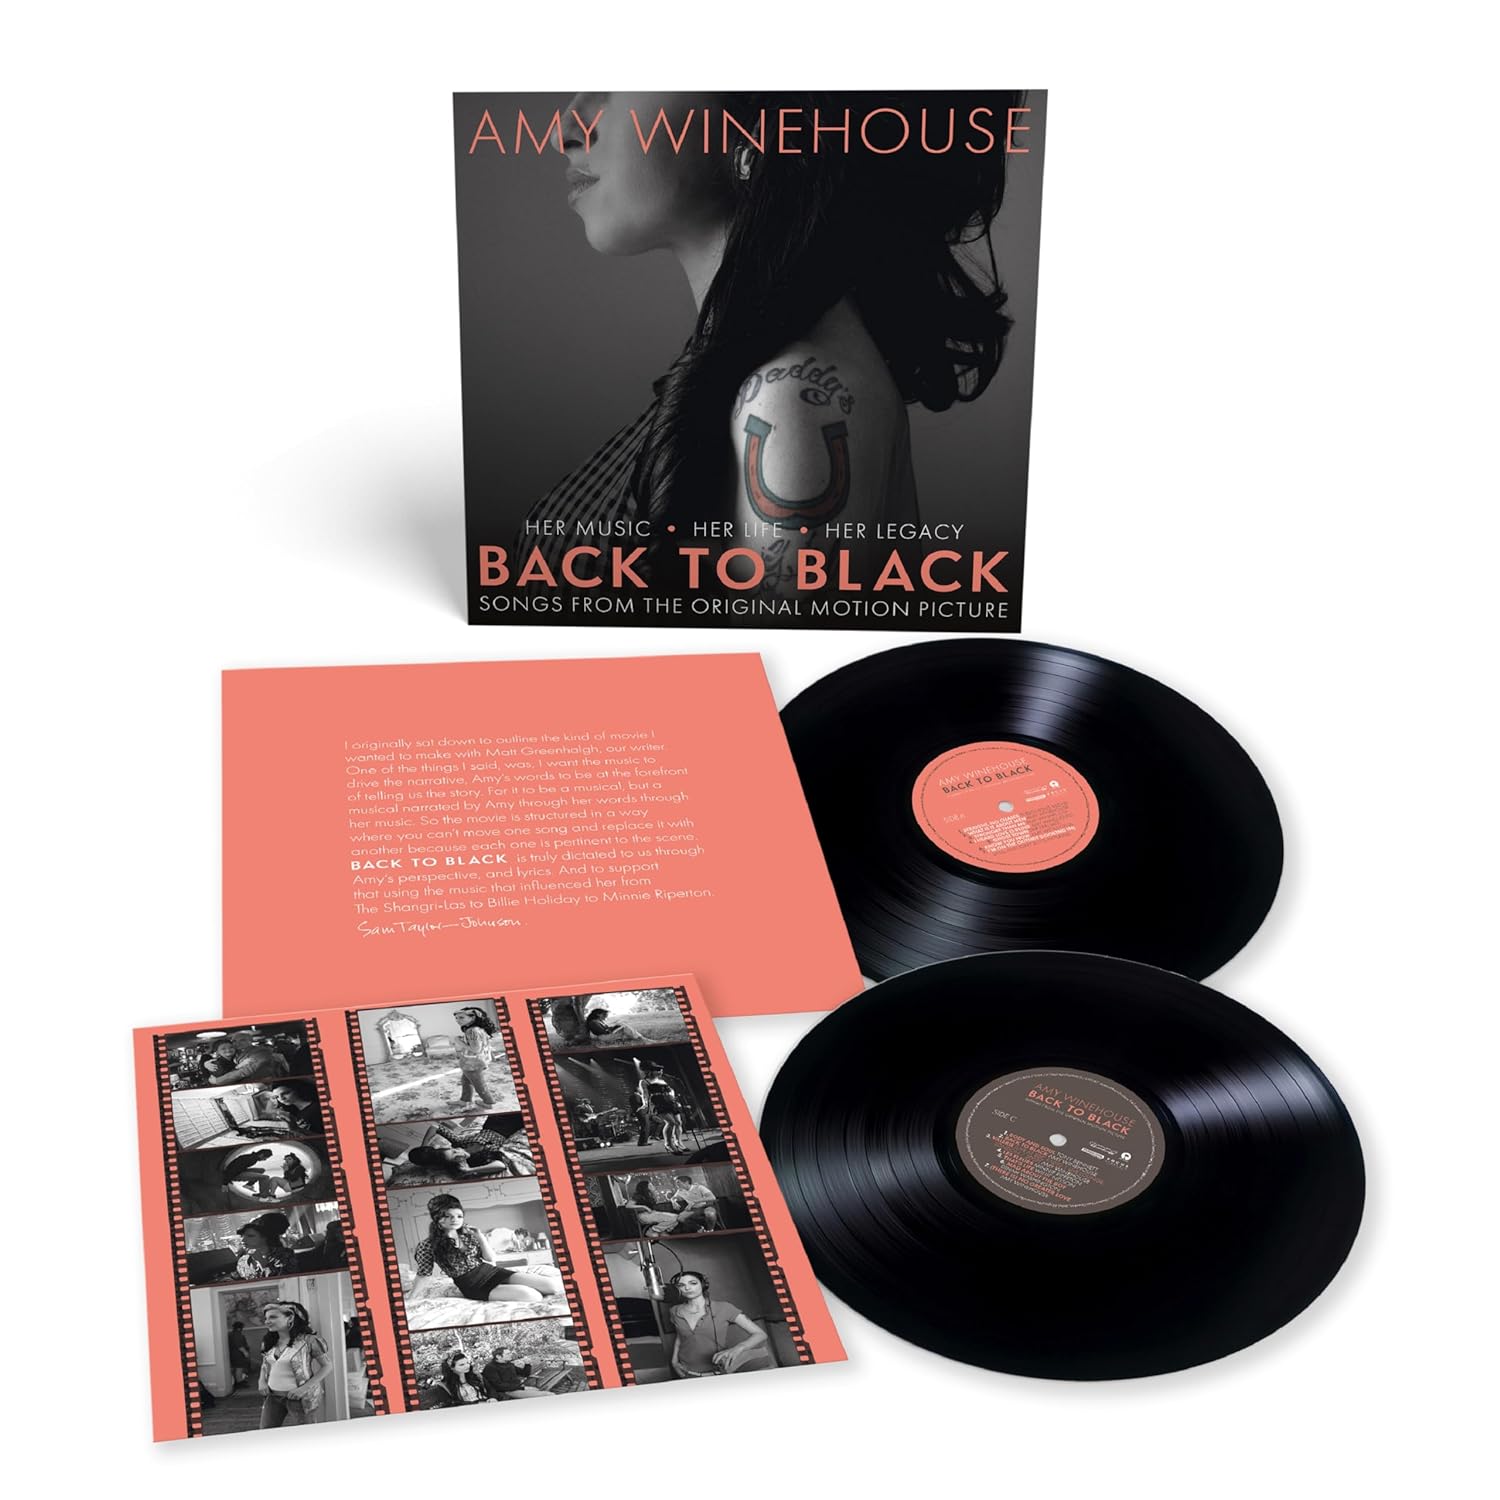 EAN : 0600753997451 - Back To Black : Songs From The Original Motion Picture Édition Limitée